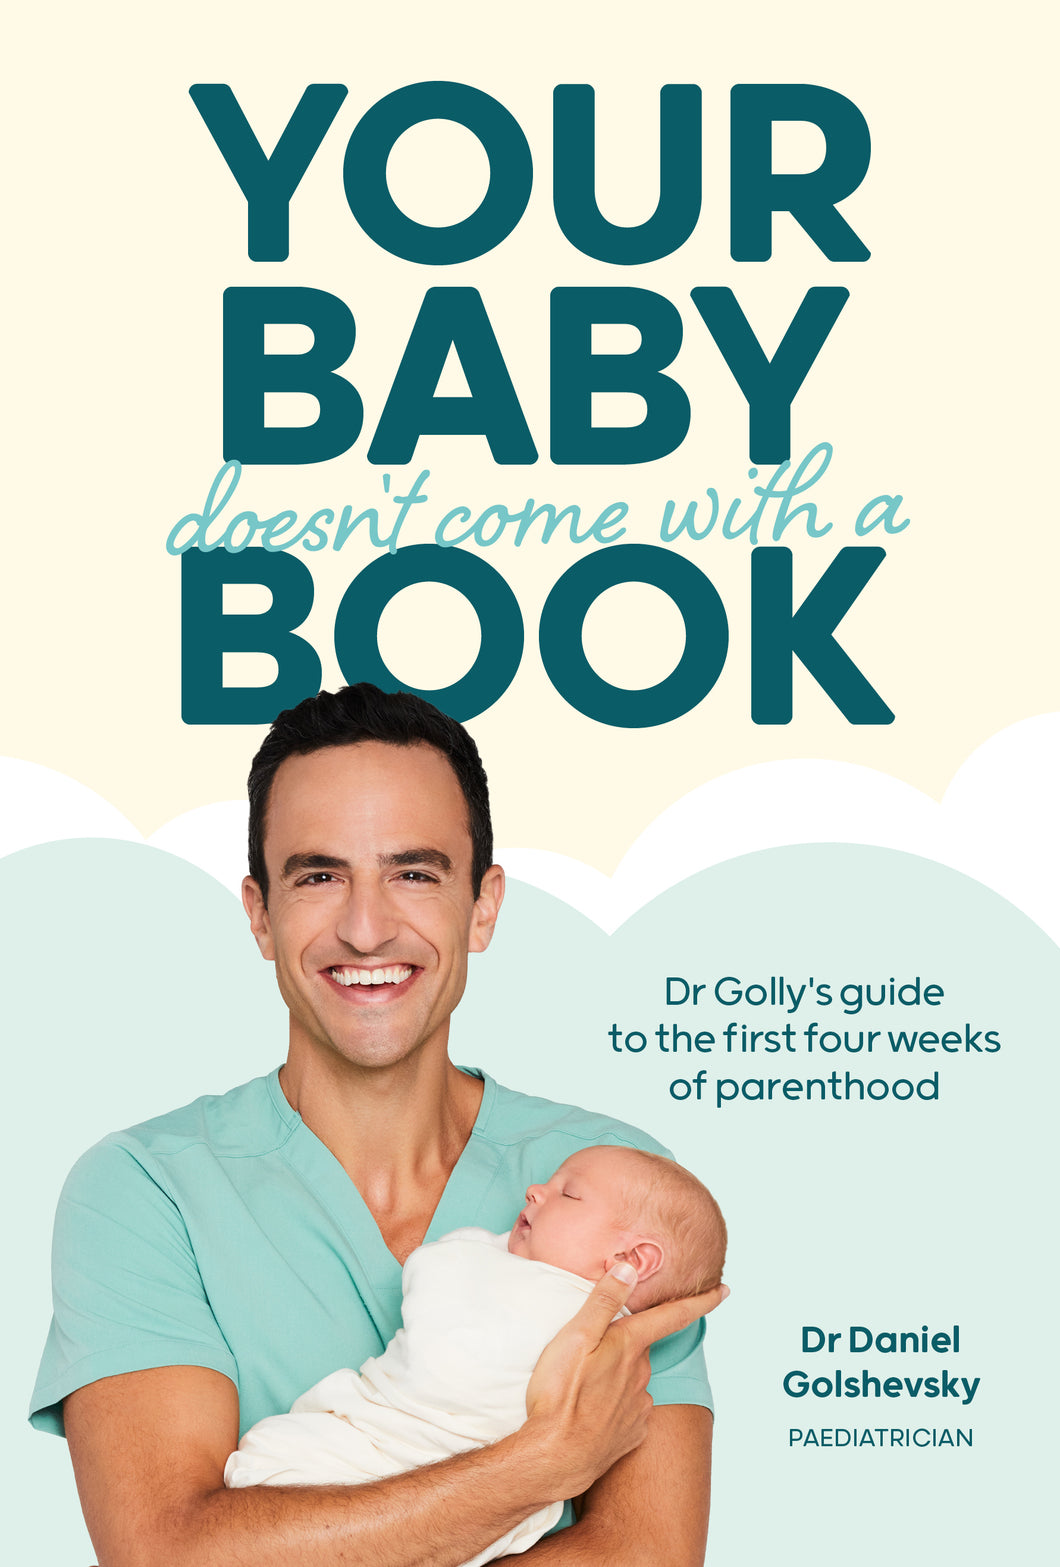 Your Baby Doesn't Come with a Book by Dr Daniel Golshevsky